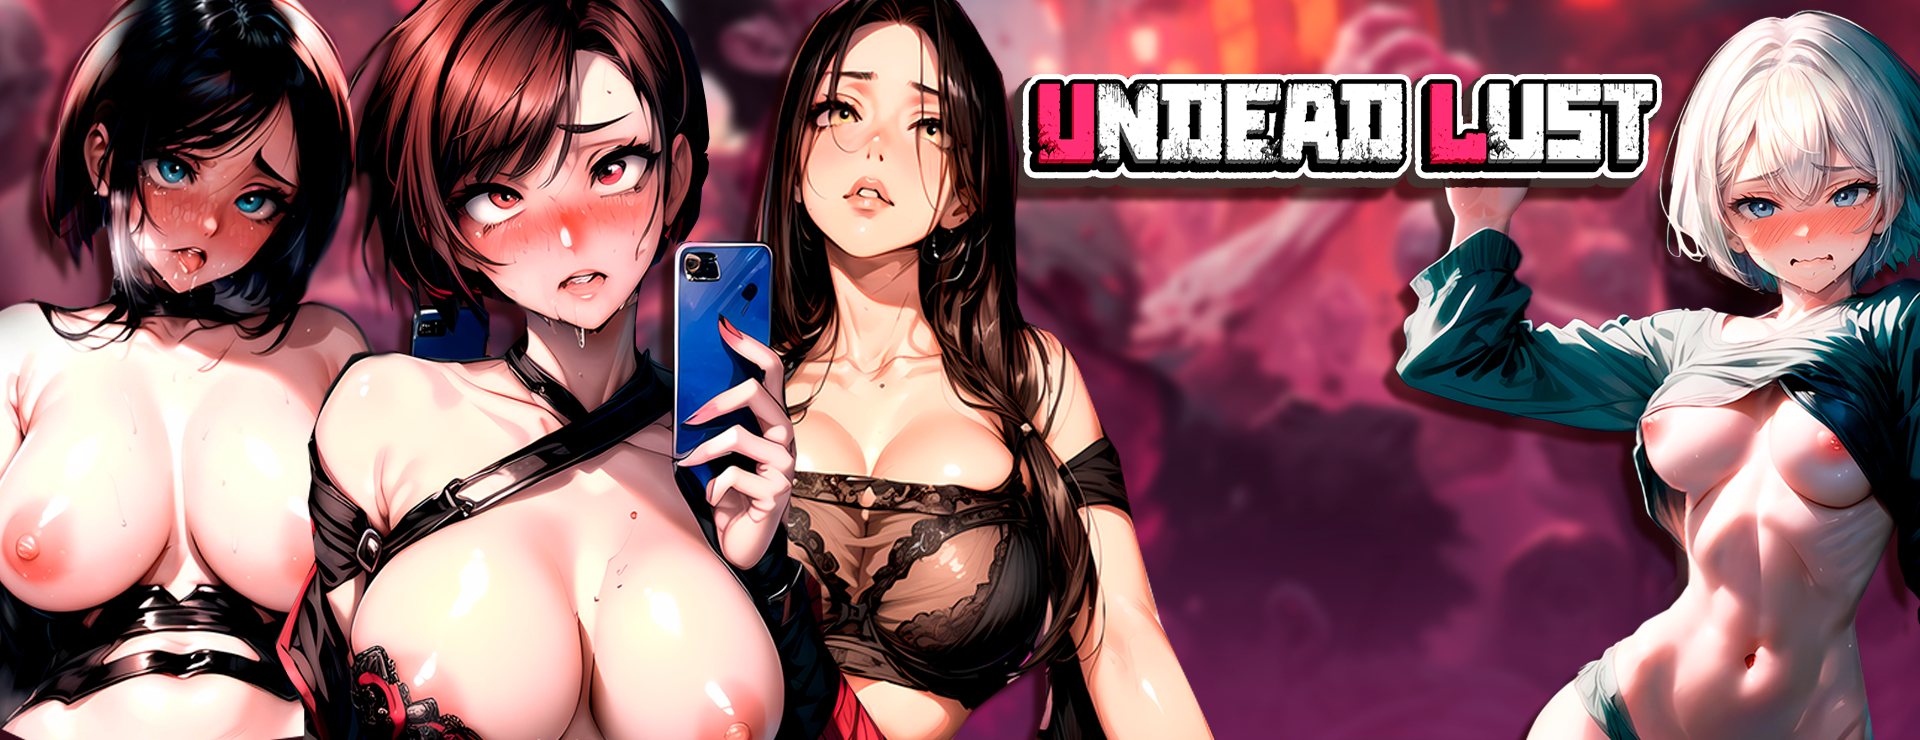 Undead Lust - Idle Game